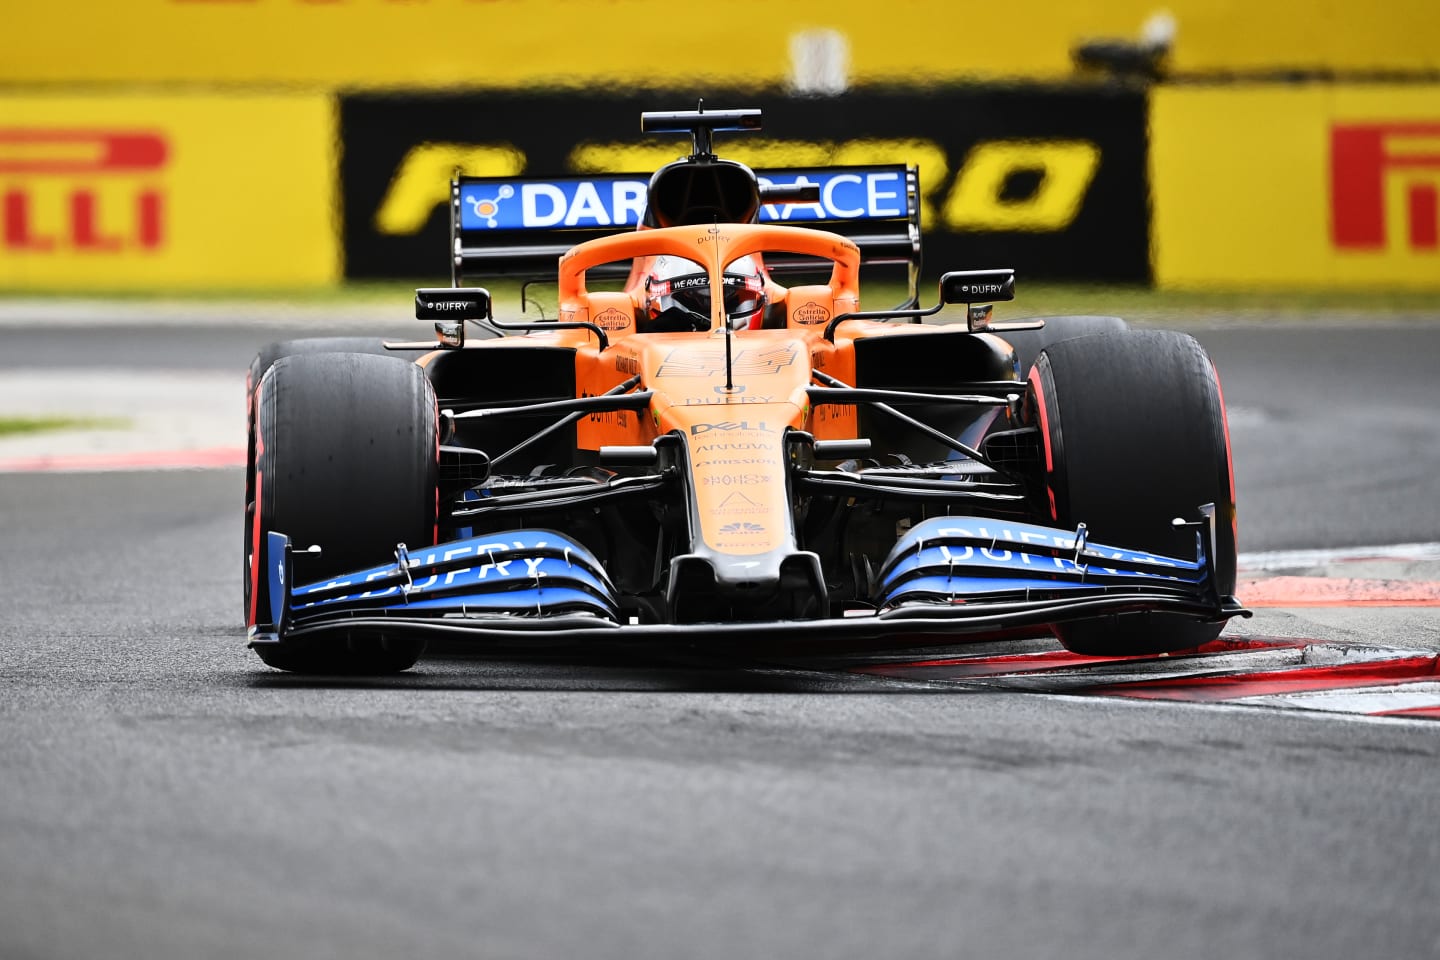 BUDAPEST, HUNGARY - JULY 18: Carlos Sainz of Spain driving the (55) McLaren F1 Team MCL35 Renault on track during qualifying for the F1 Grand Prix of Hungary at Hungaroring on July 18, 2020 in Budapest, Hungary. (Photo by Joe Klamar/Pool via Getty Images)